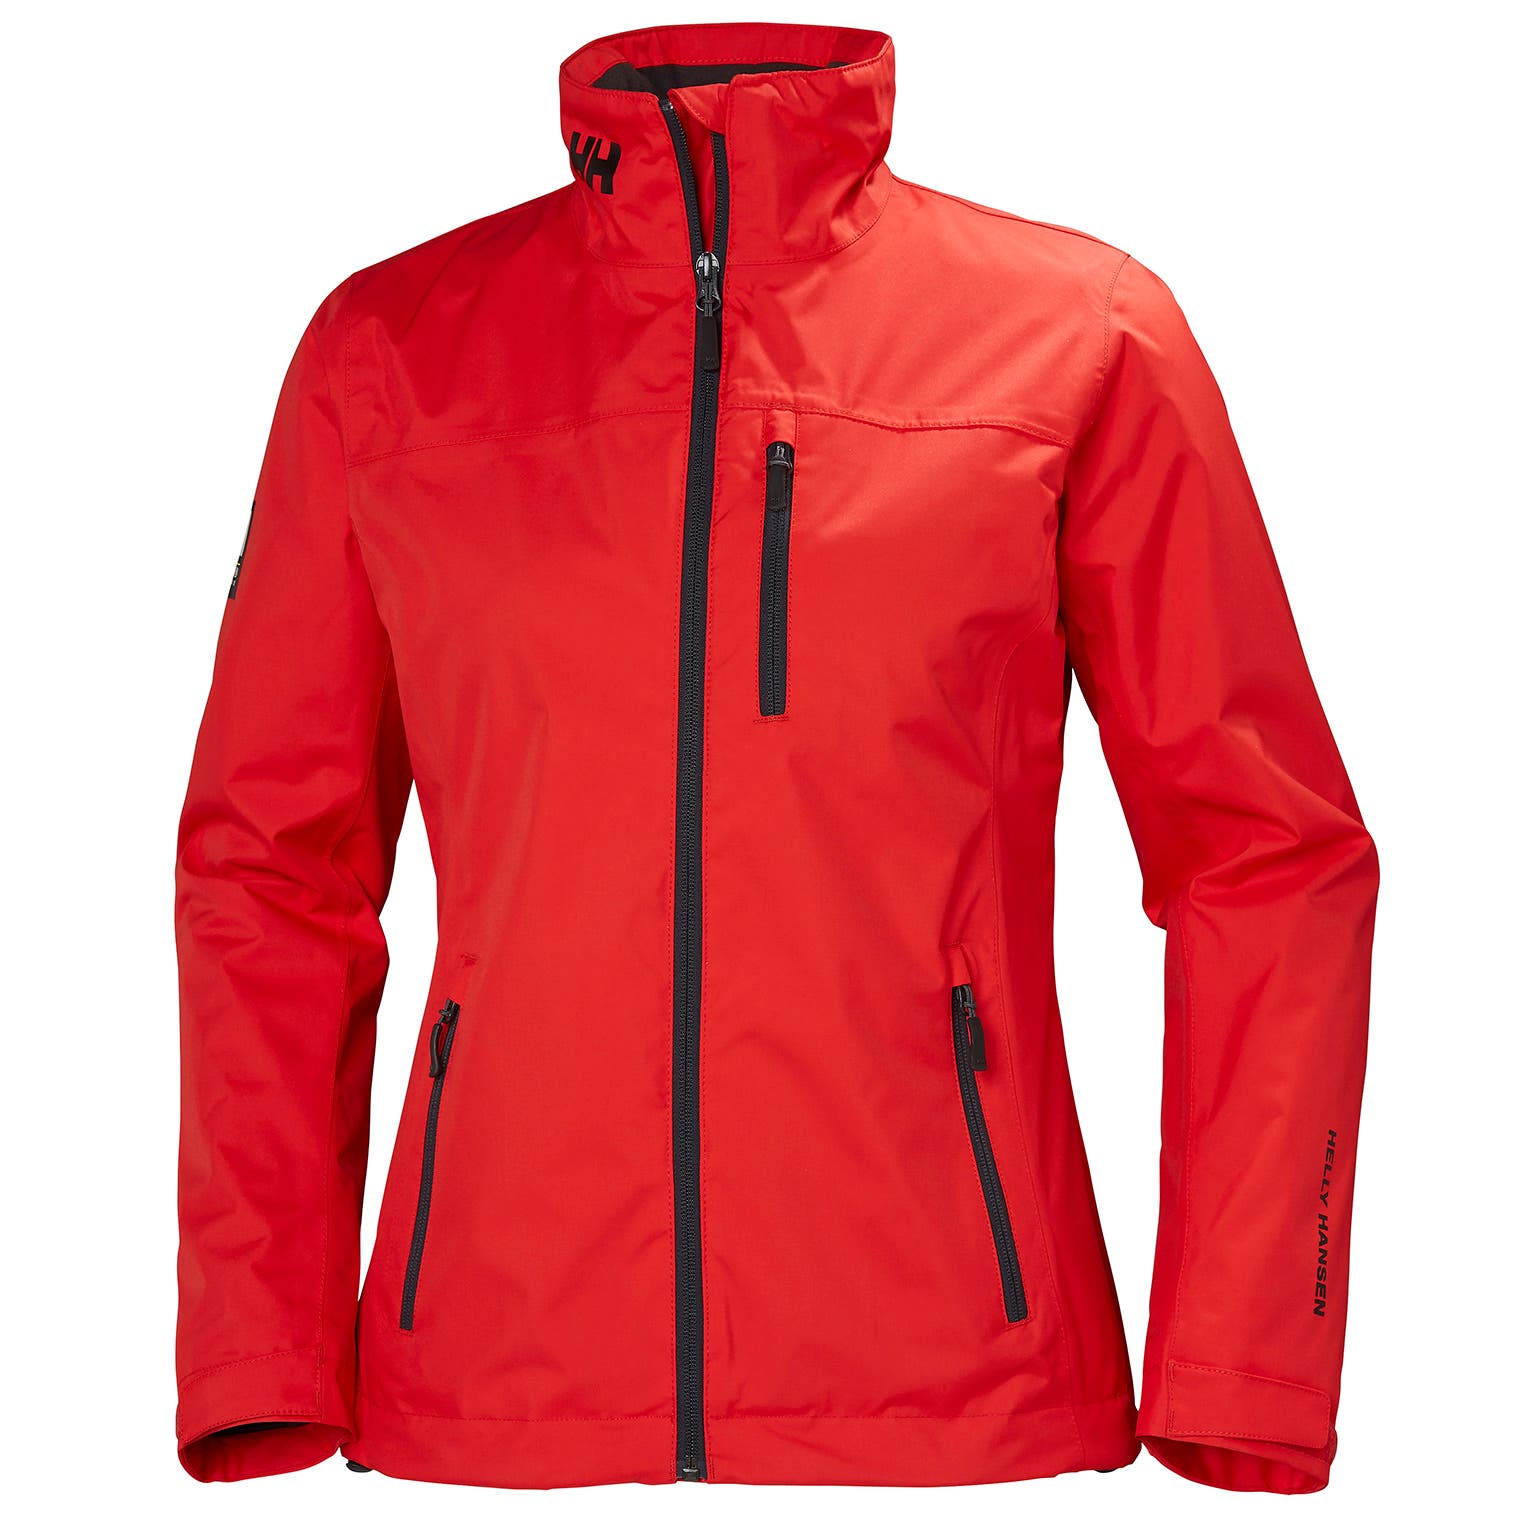 Helly Hansen Women's Crew Midlayer Jacket in Alert Red from the front